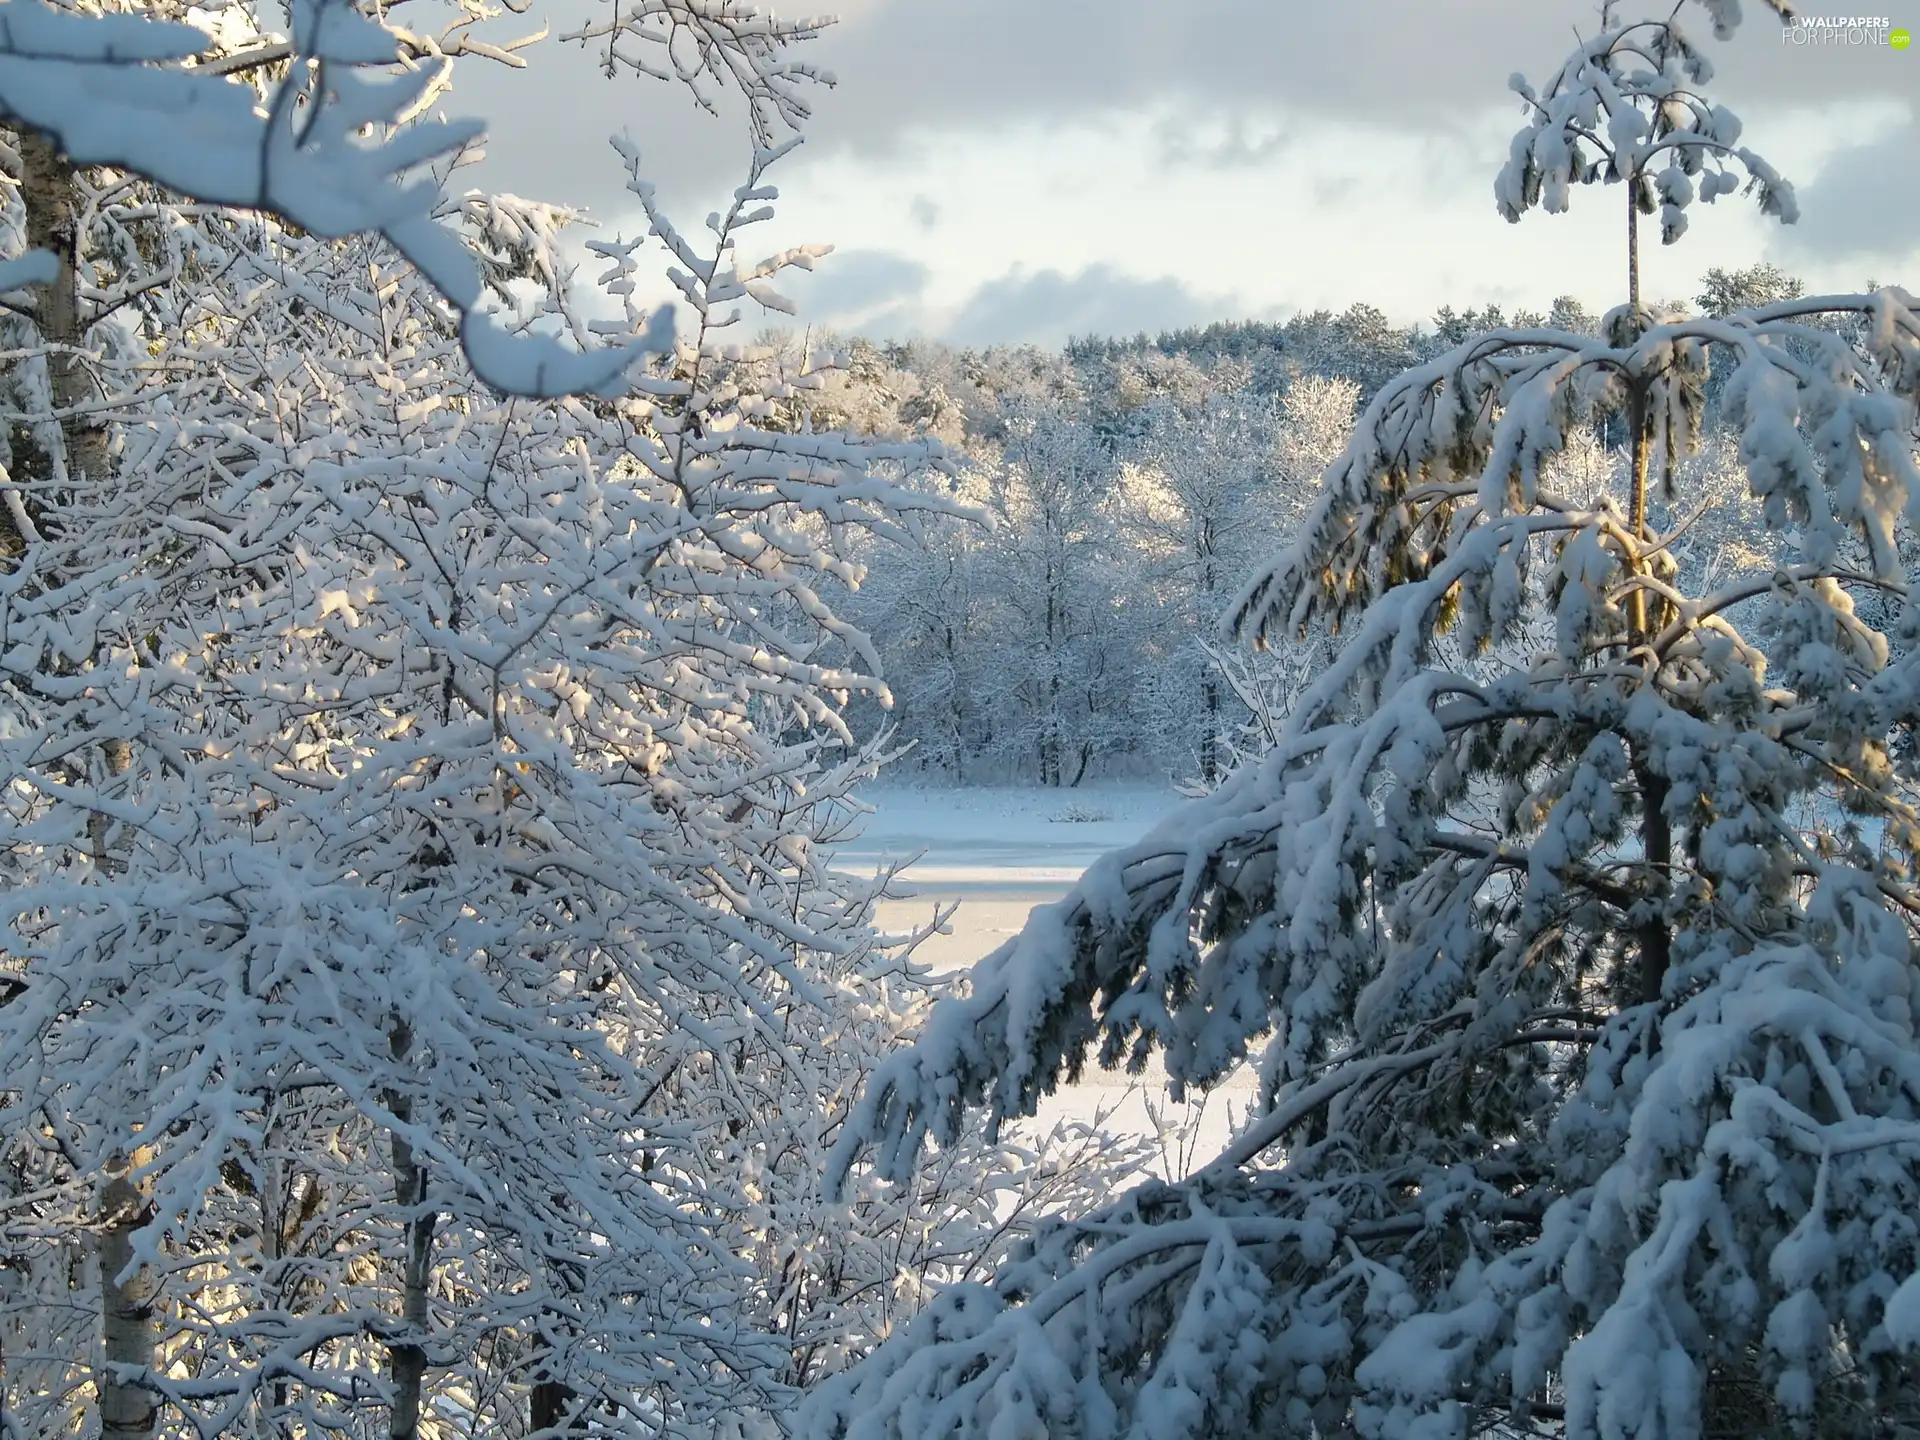 winter, forest, snow